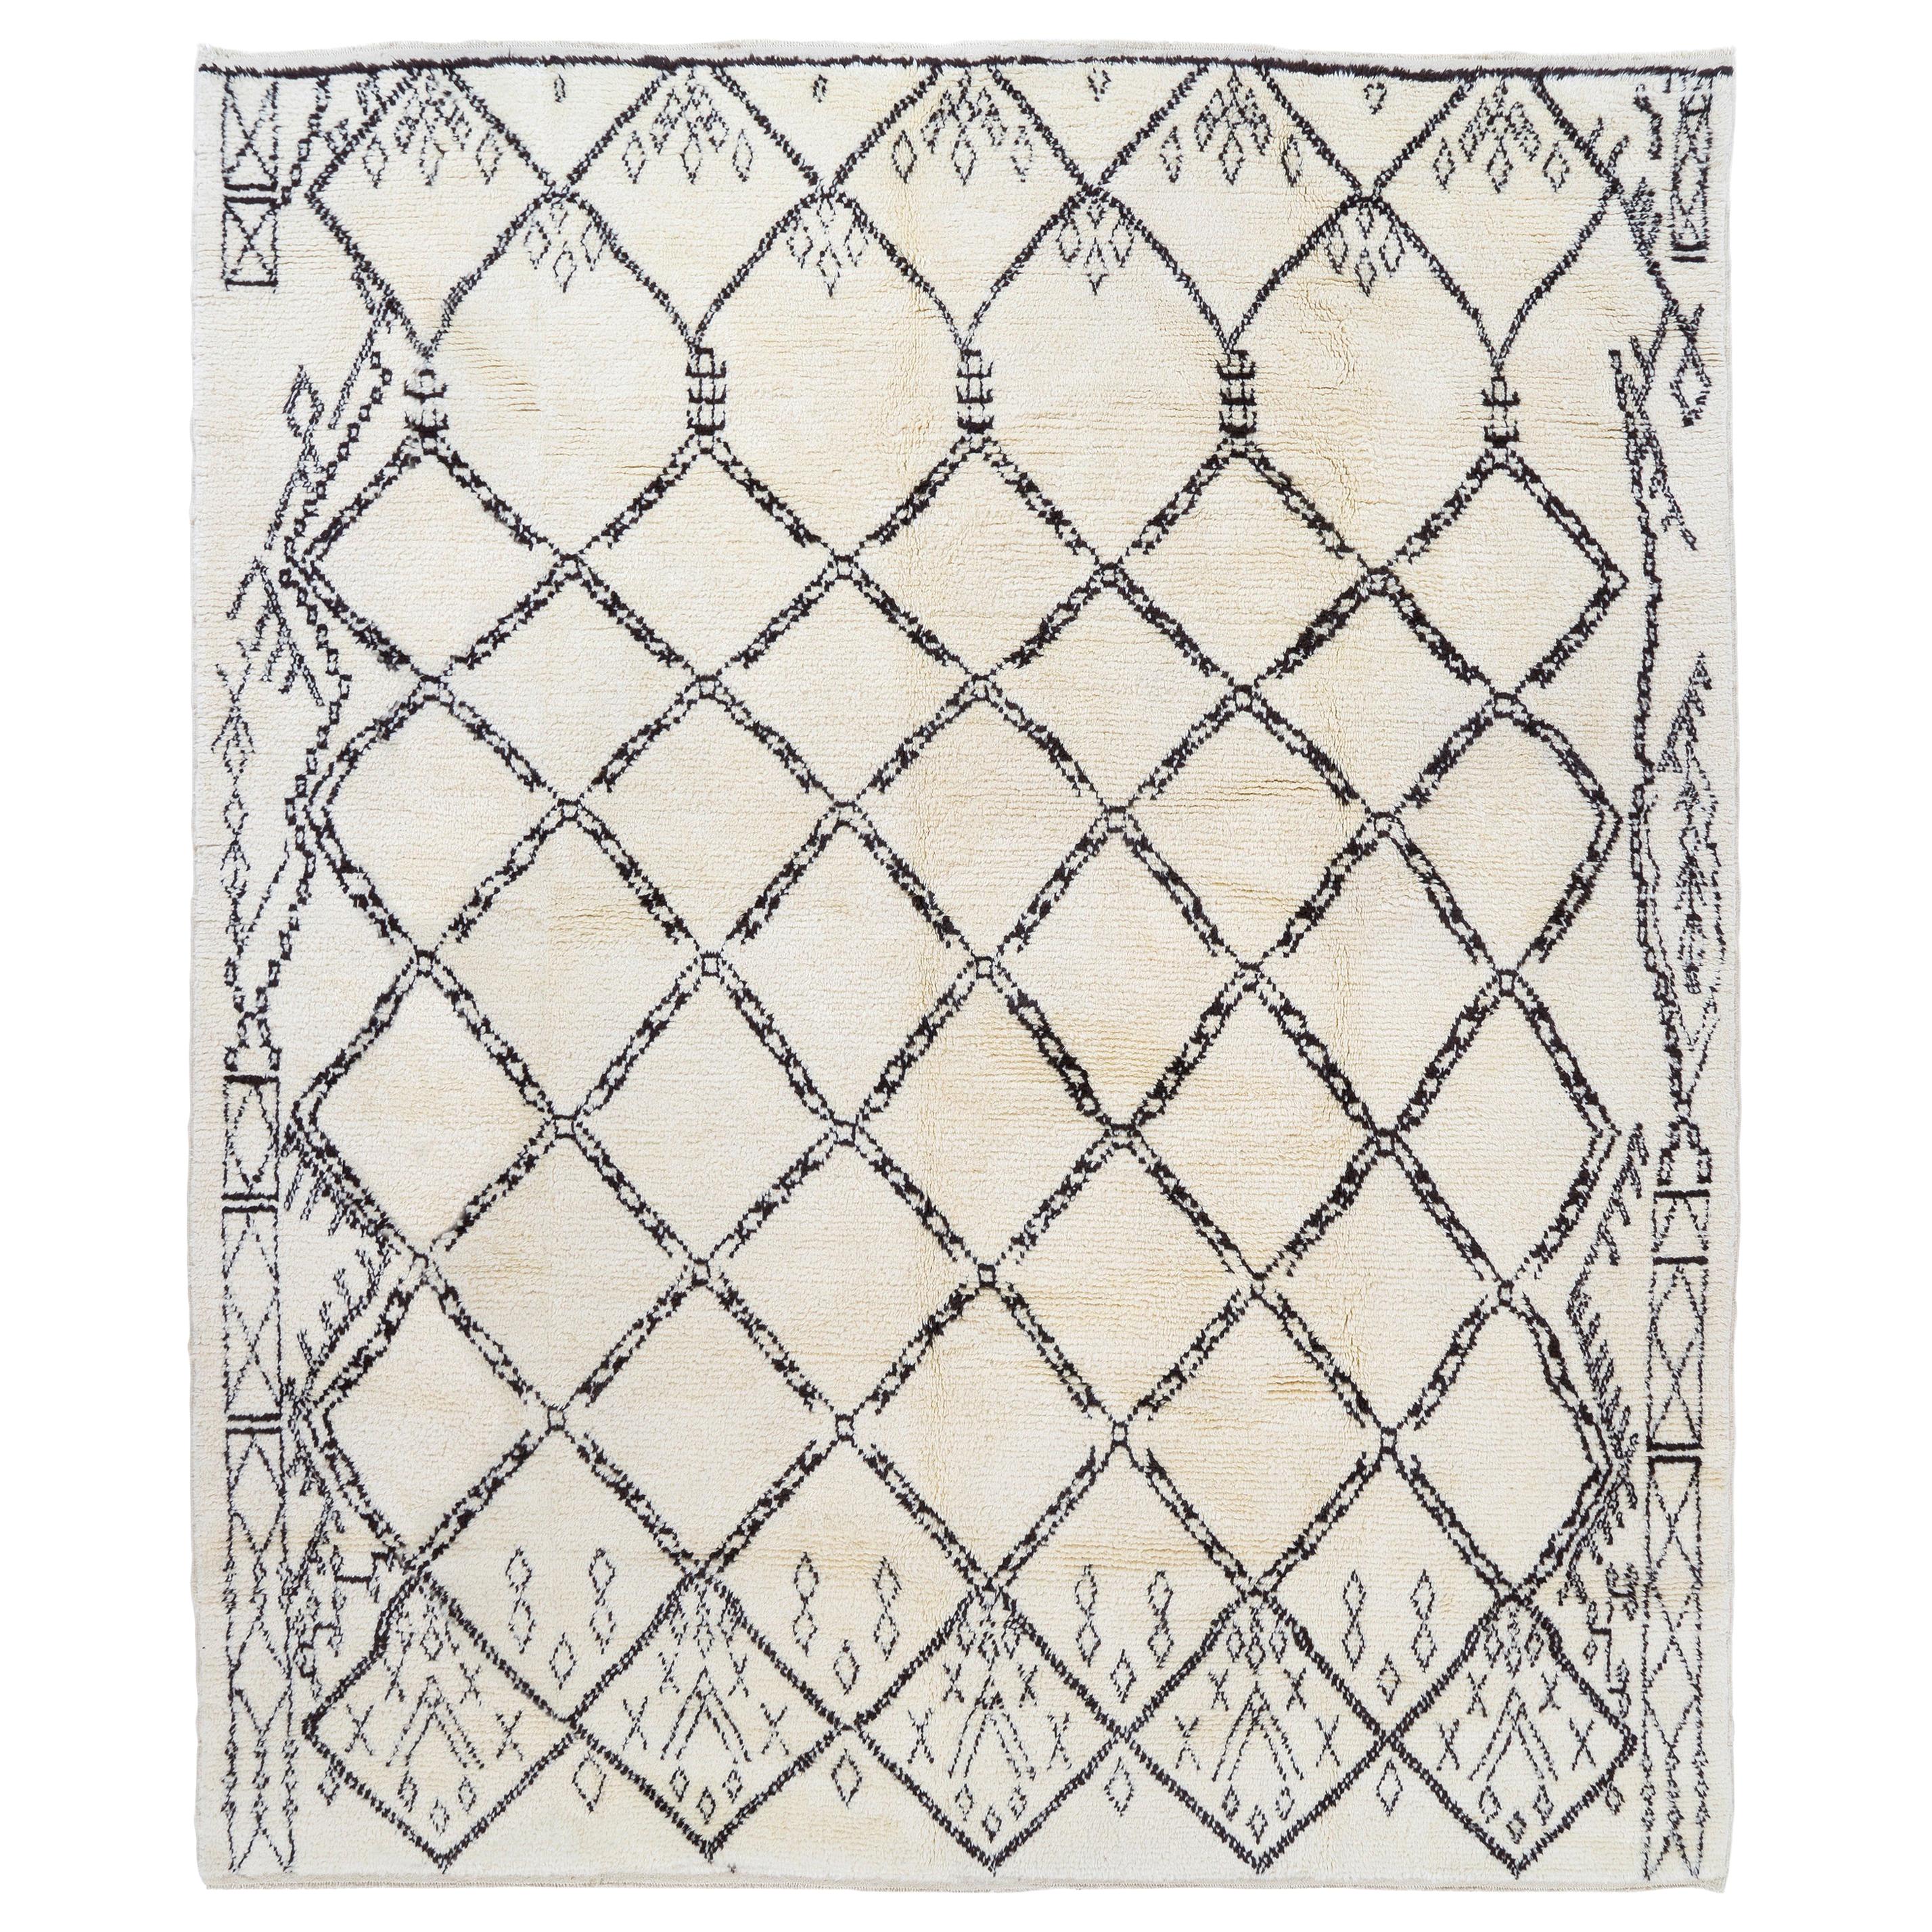 10x14 Ft Contemporary Moroccan Berber Wool "Tulu" Rug. Custom Options Available